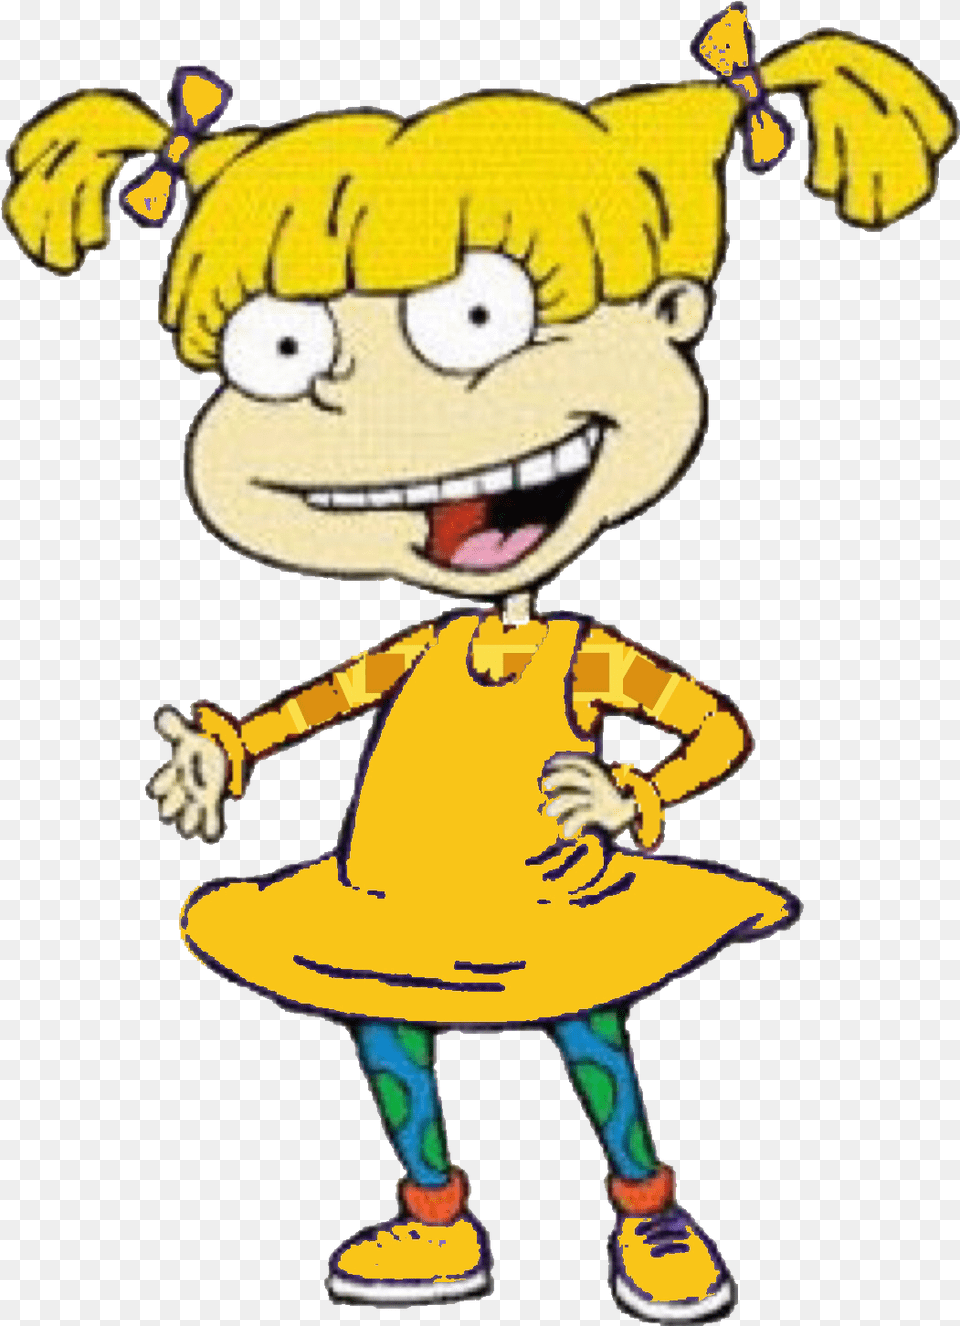 Angelica In Her Yellow Square Shrit Blues Clues Angelica, Clothing, Coat, Cartoon, Doll Free Transparent Png